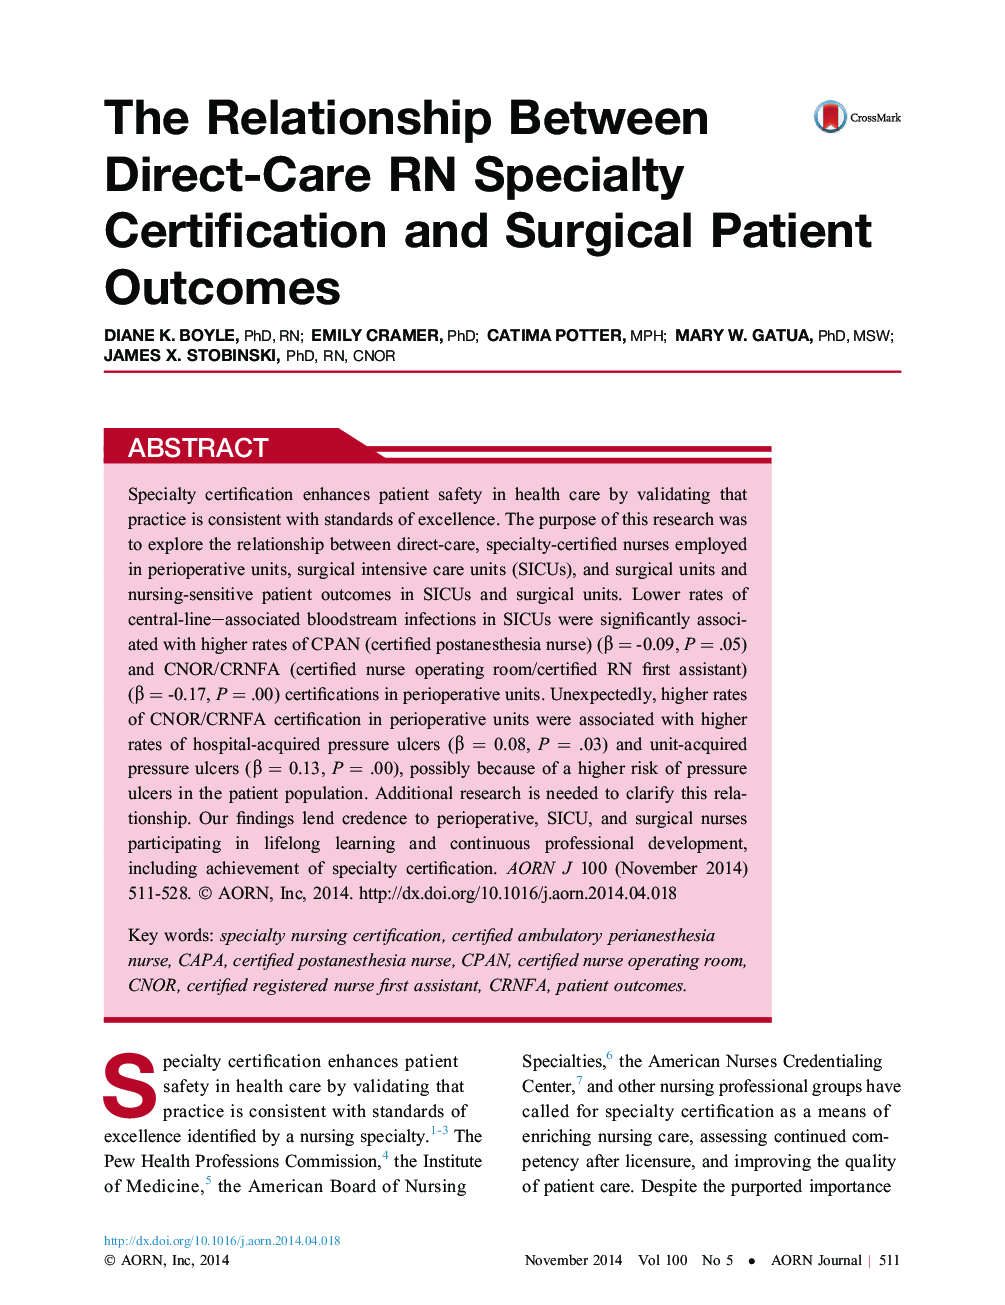 The Relationship Between Direct-Care RN Specialty Certification and Surgical Patient Outcomes